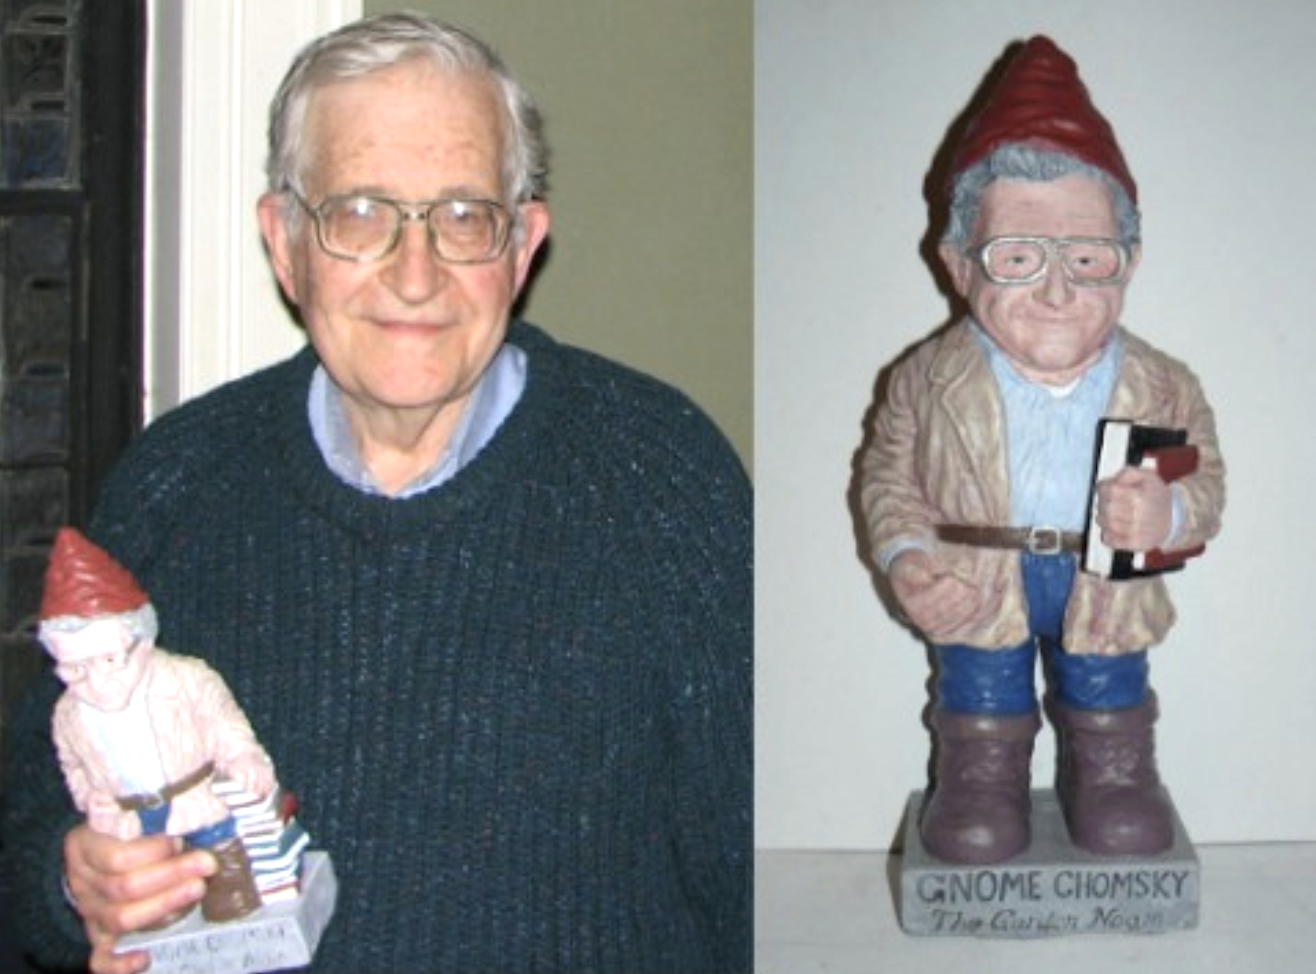 Gnome Chomsky: The Indispensable Ornament for the Thinking Person’s Garden